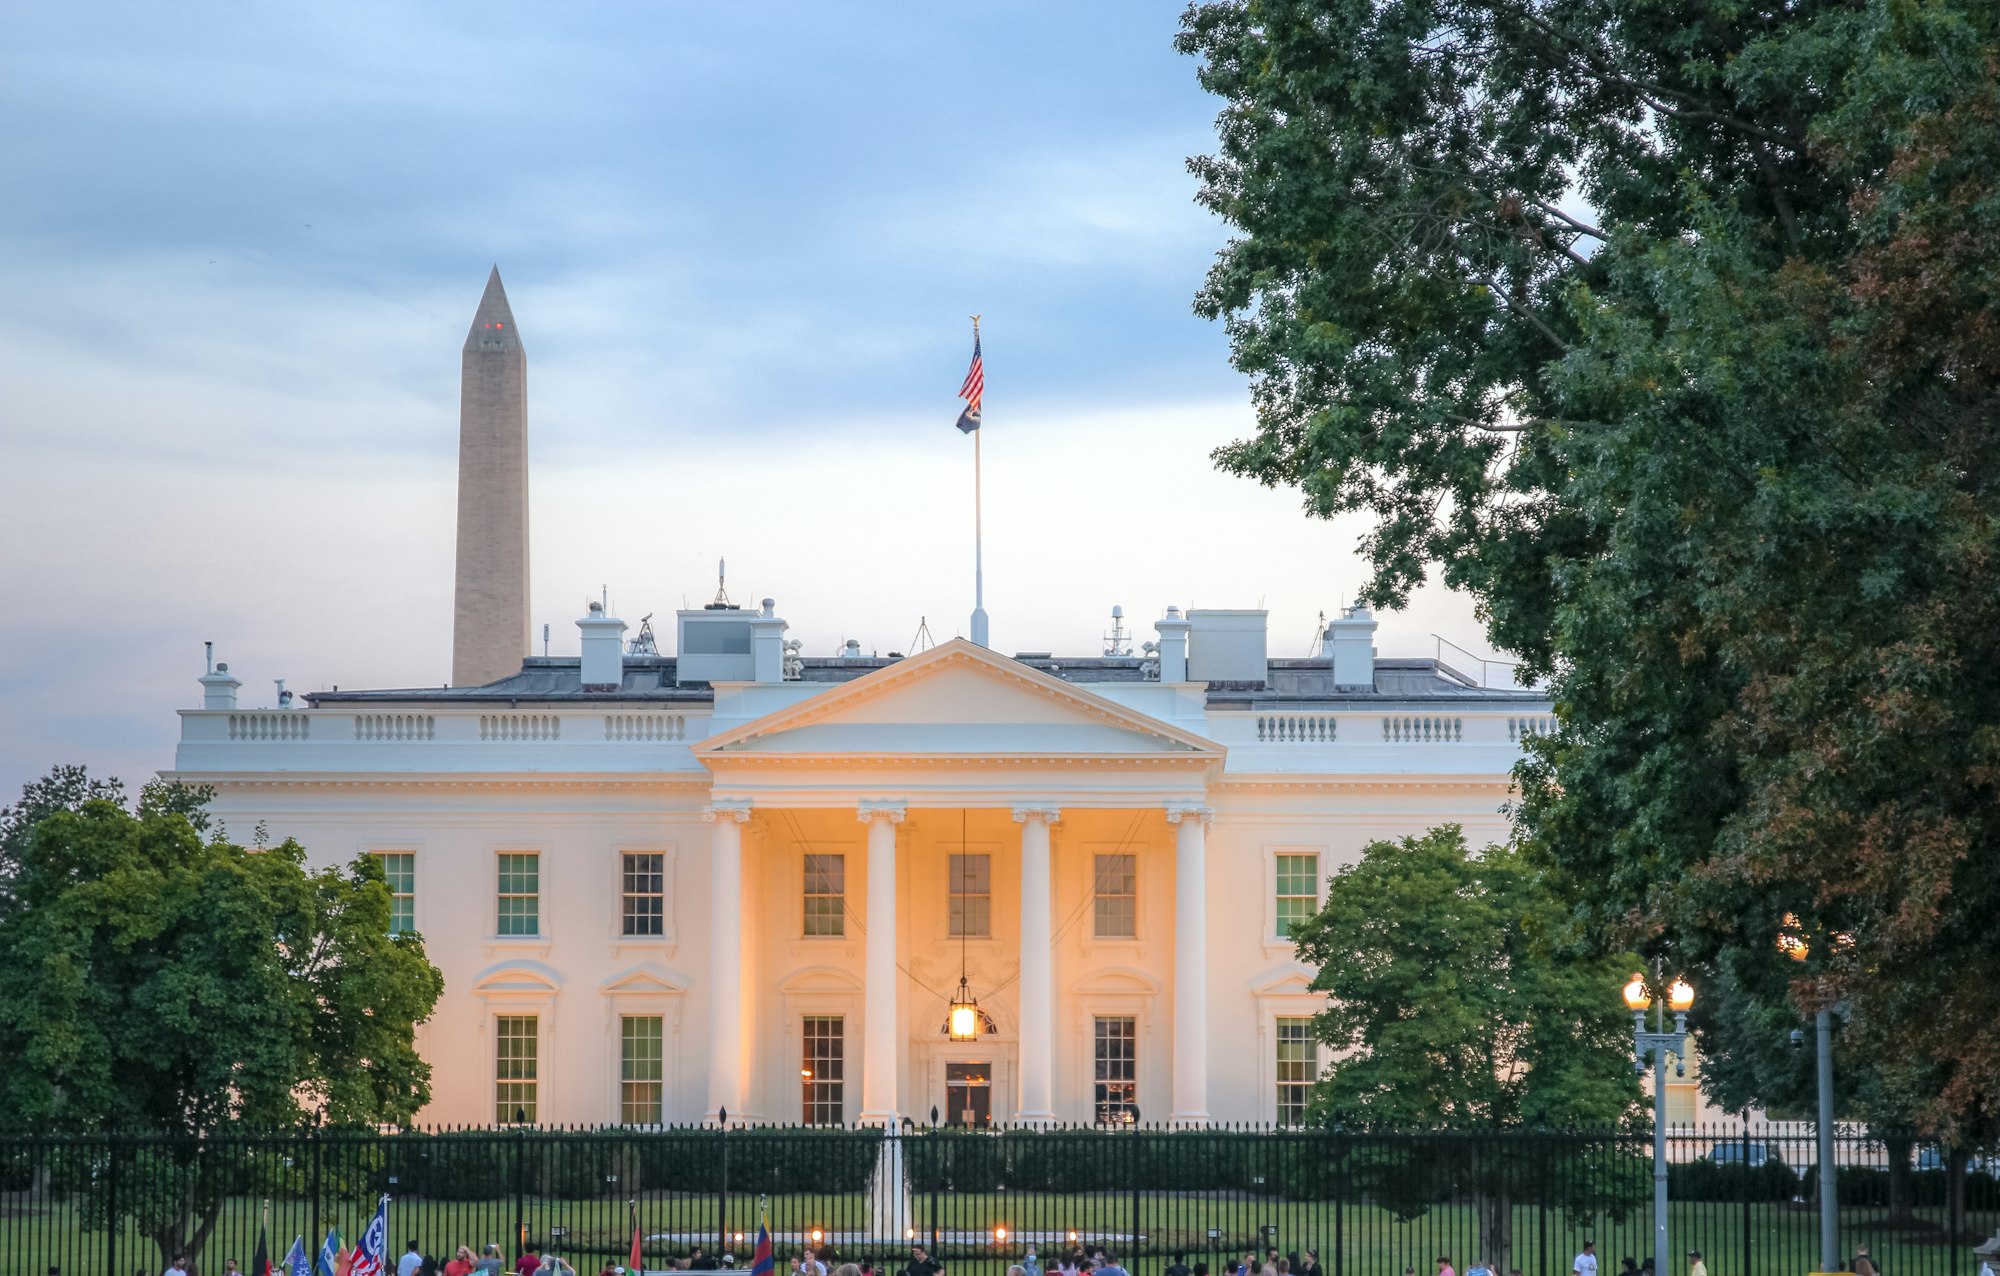 Who Was The First President To Live In The White House?